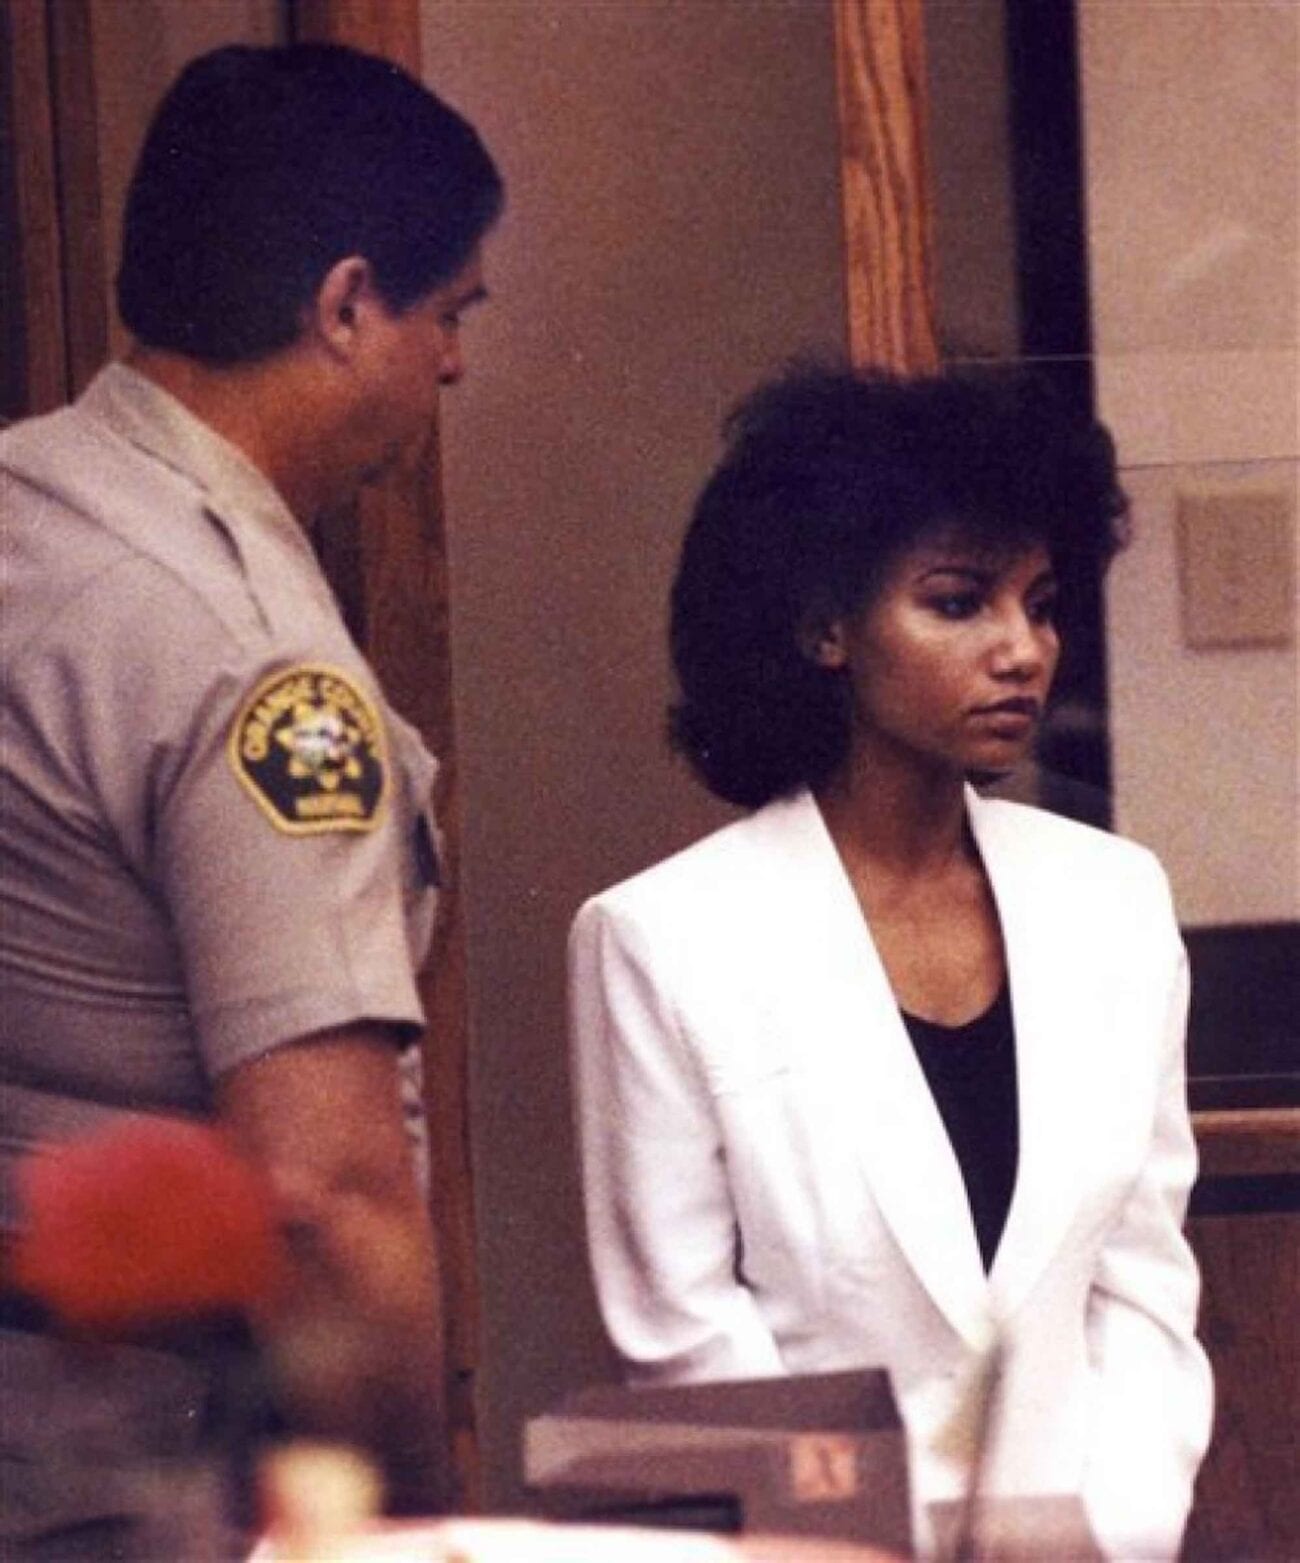 Omaima Nelson, otherwise known as the “Thanksgiving Butcher", was a crafty individual. Here's everything we know about cannibal Omaima Nelson.